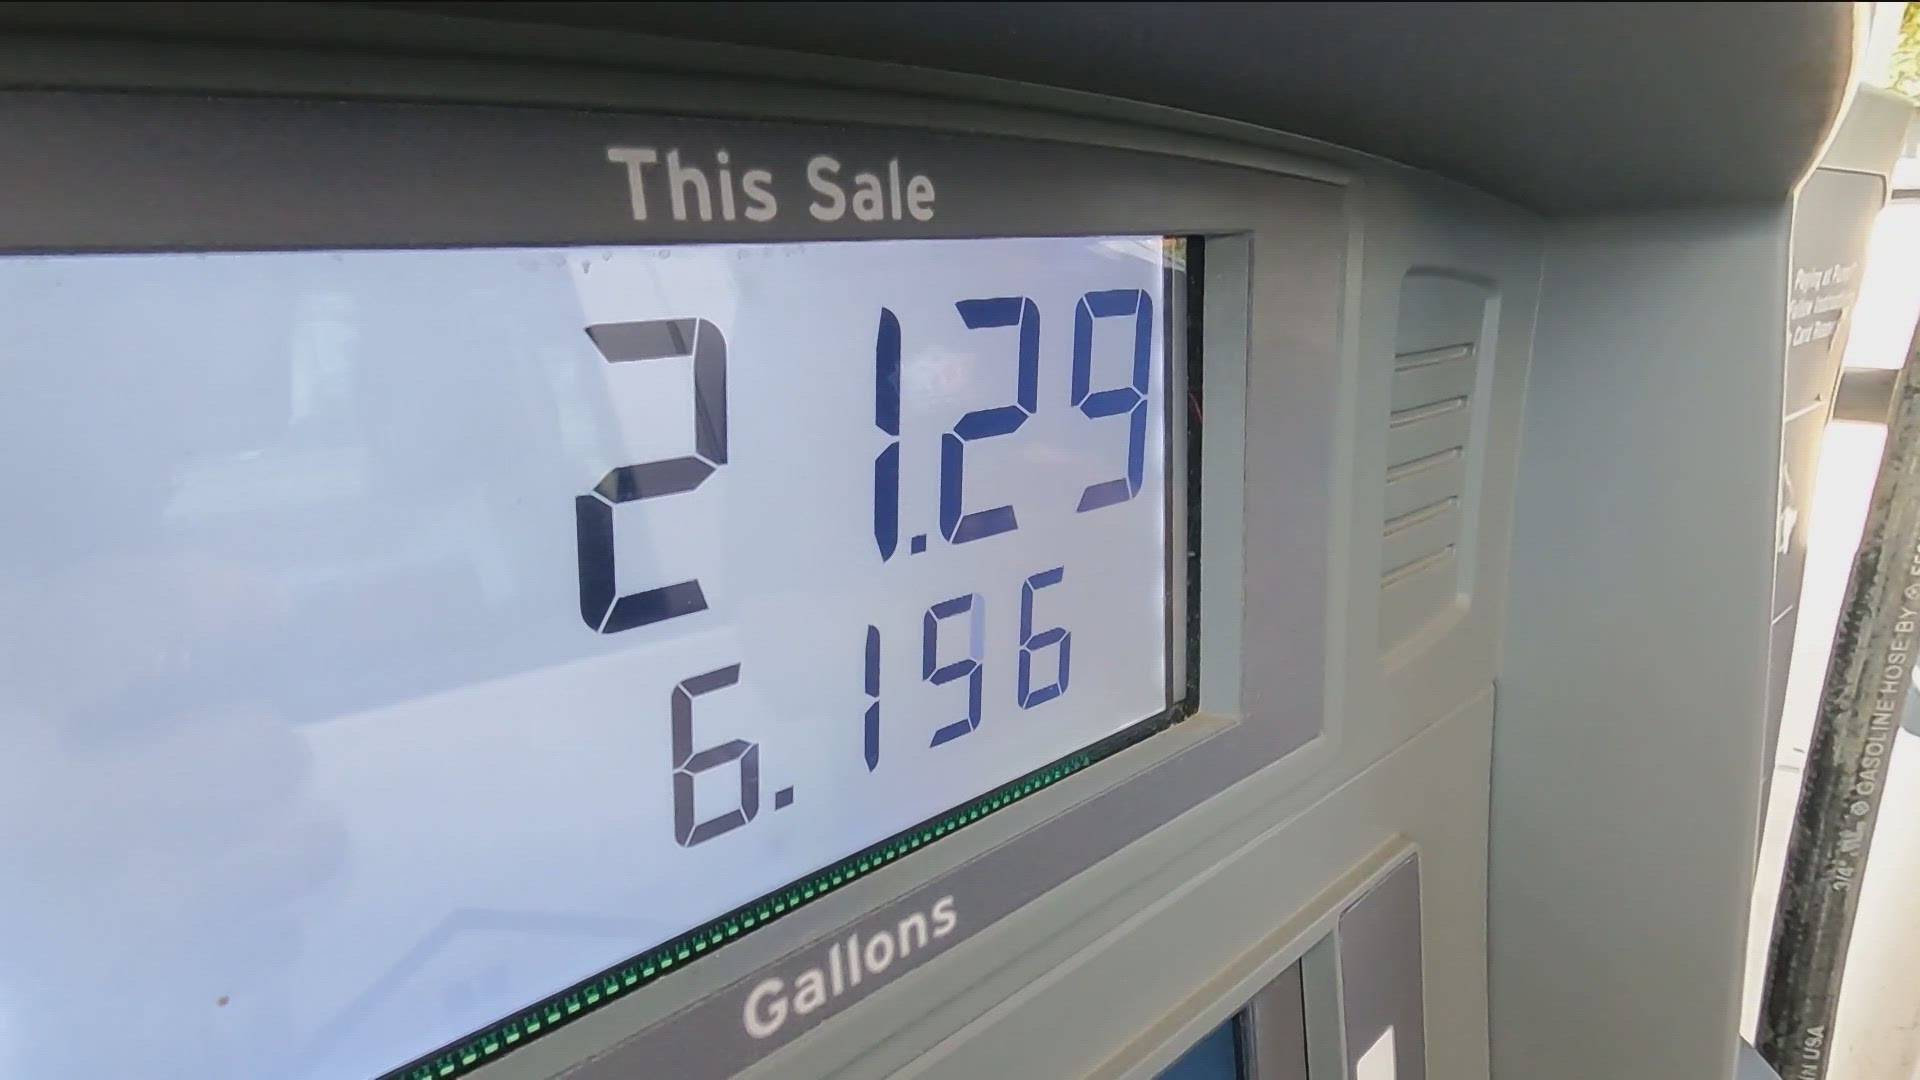 According to AAA, gas prices have risen in Austin by 22 cents in just a week.